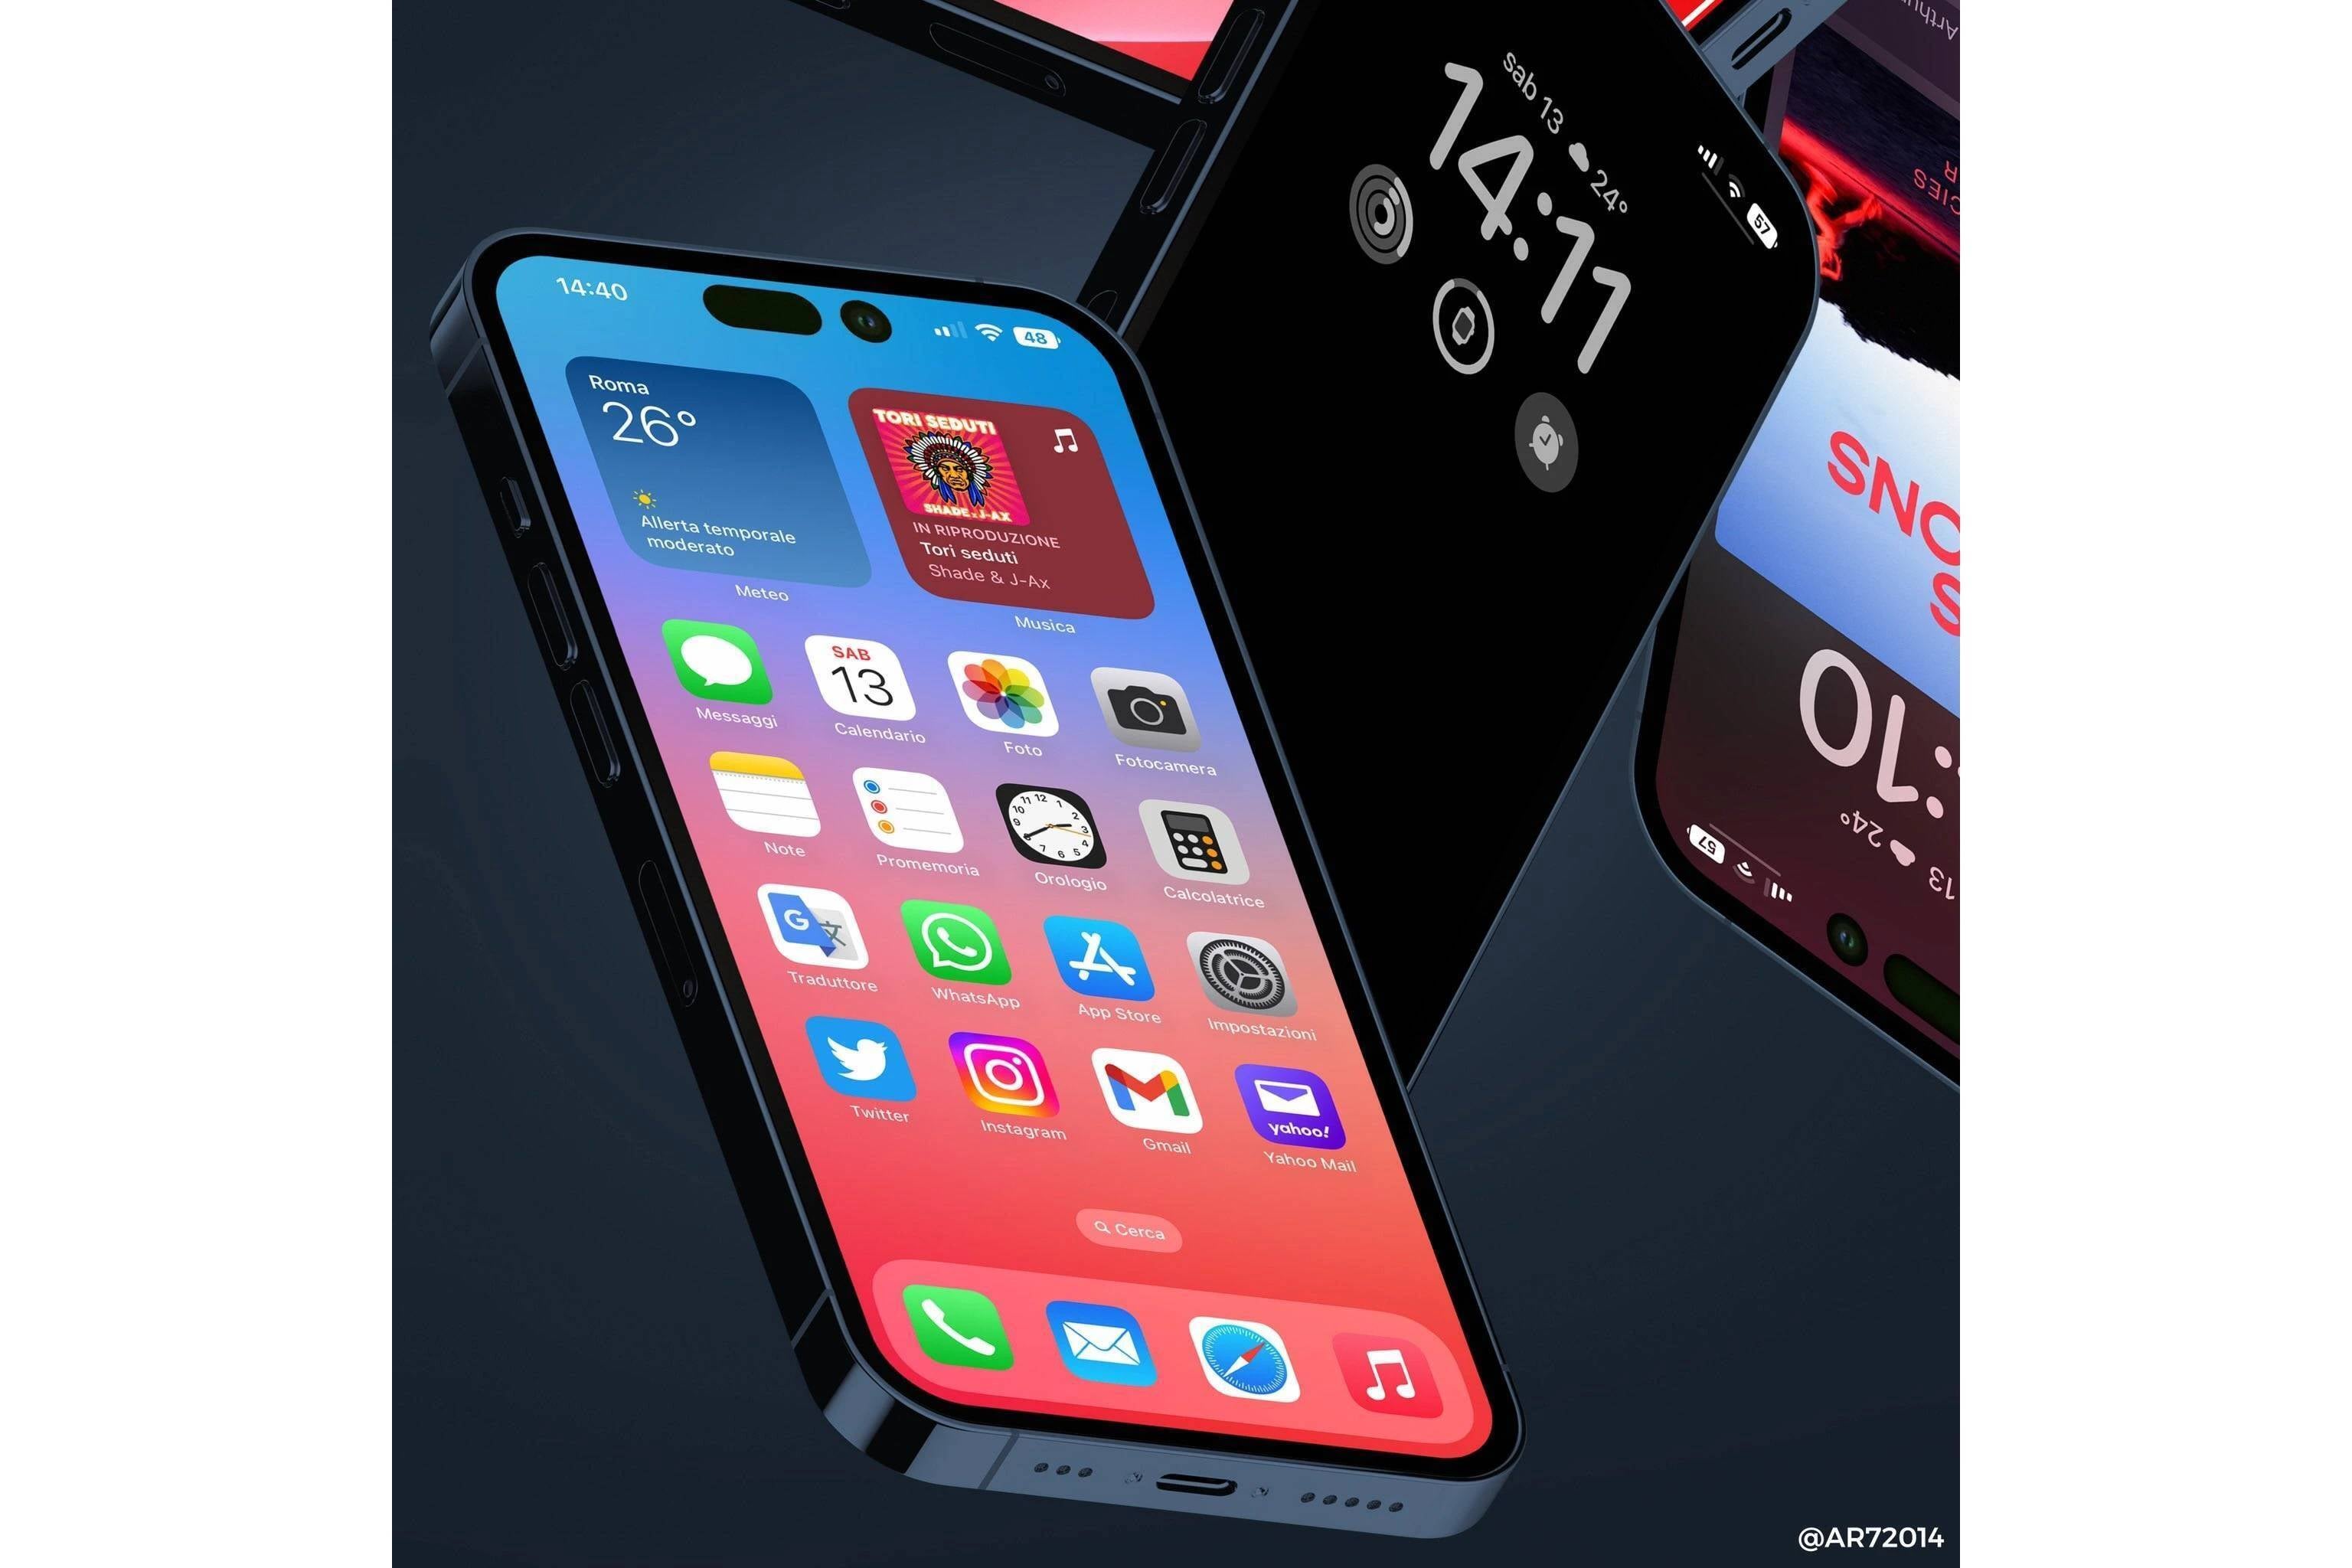 The iPhone 14 Pro and Pro Max will allow you to see quick information without needing to unlock them - iPhone 14 event invite's Far Out tagline & spacey theme could be hinting at these new features